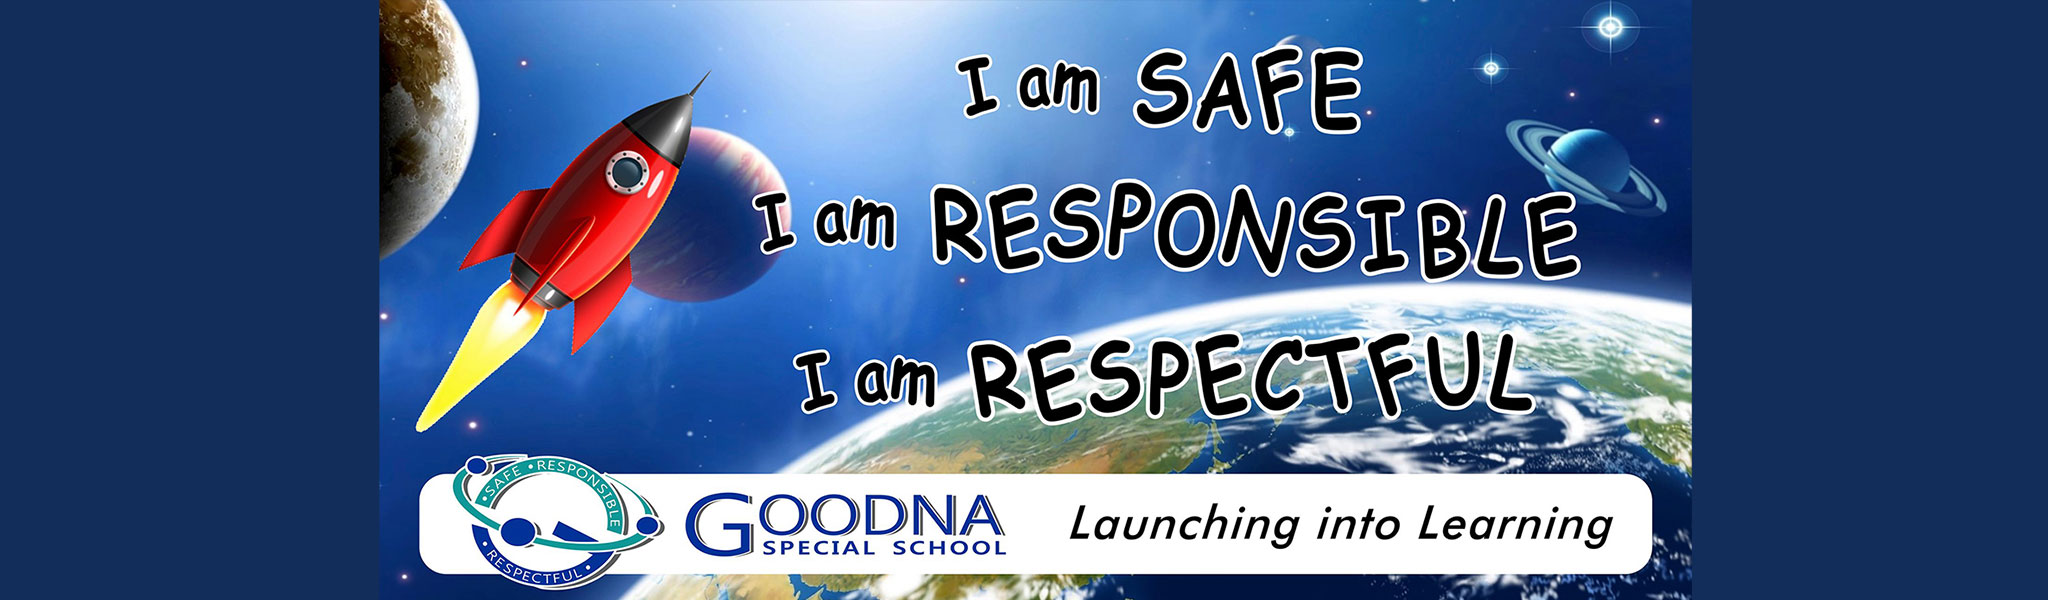 Safe, responsible and respectful